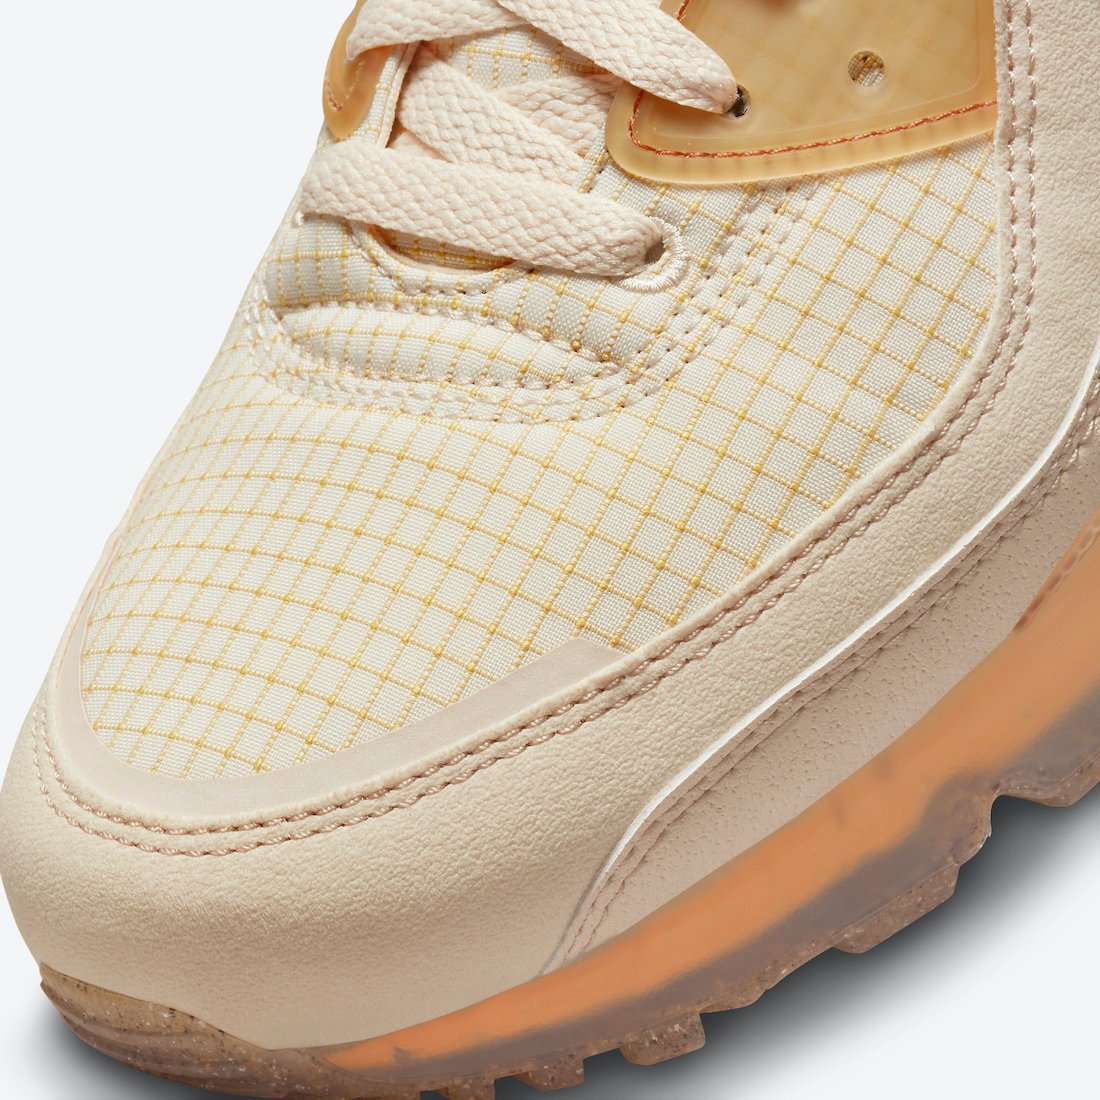 Nike Air Max 90 Terrascape Pearl White Hot Curry Fuel Orange DH2973-200 Release Date Info